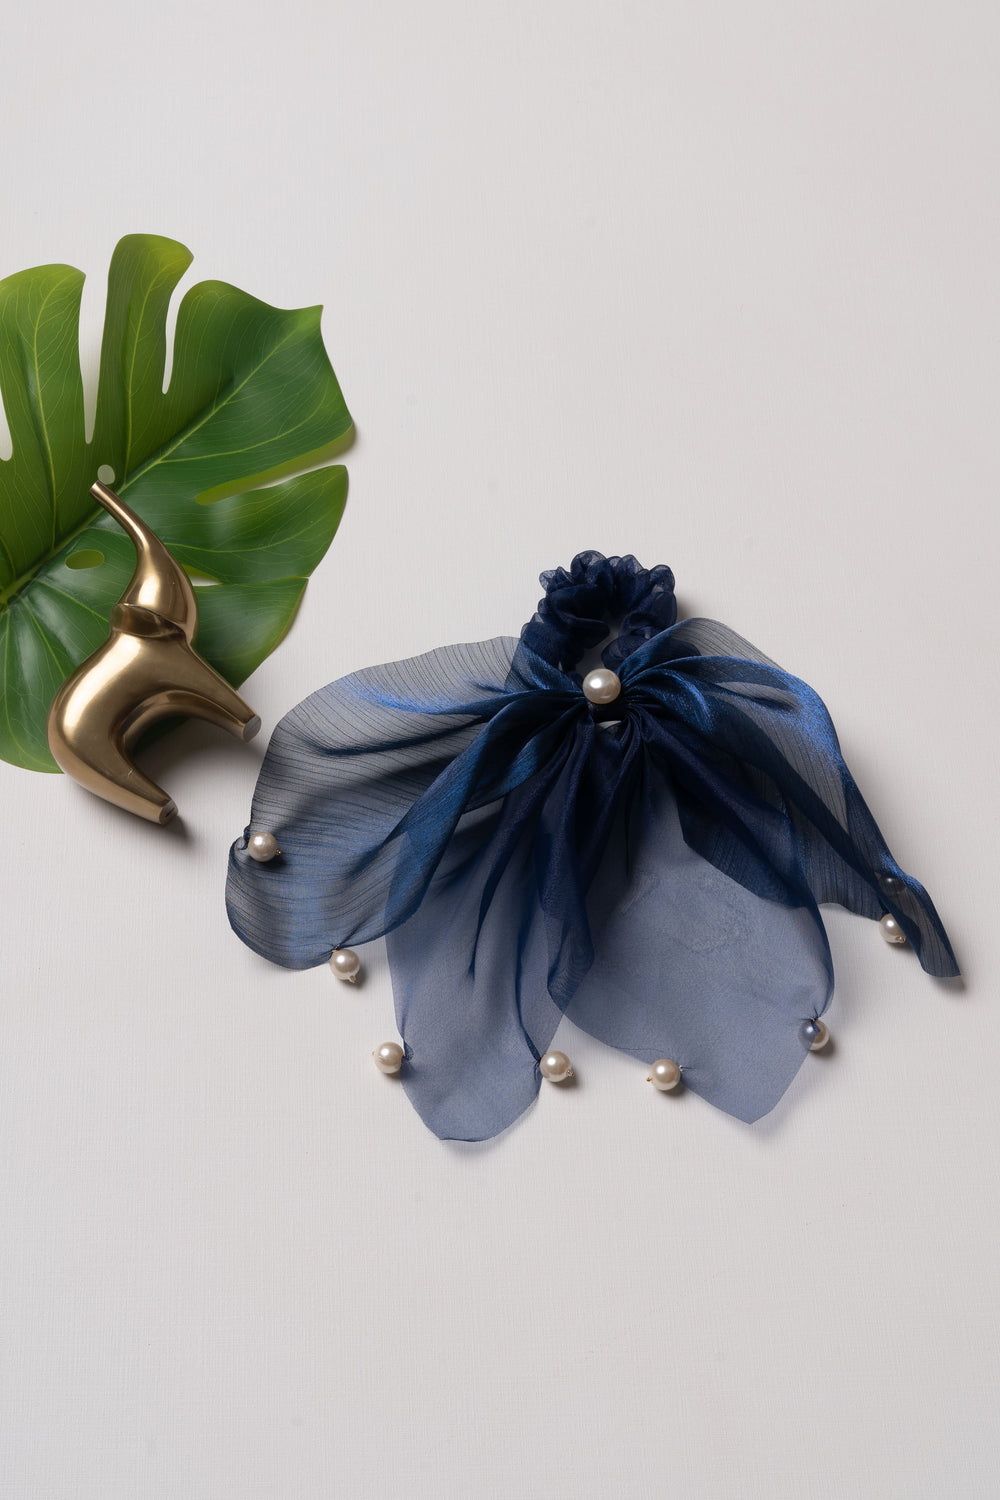 The Nesavu Scrunchies / Rubber Band Sophisticated Deep Blue Organza Bow Hairband with Pearls Nesavu Blue JHS25C Chic Deep Blue Organza Bow Hairband | Elegant Hair Accessory for Every Occasion | The Nesavu